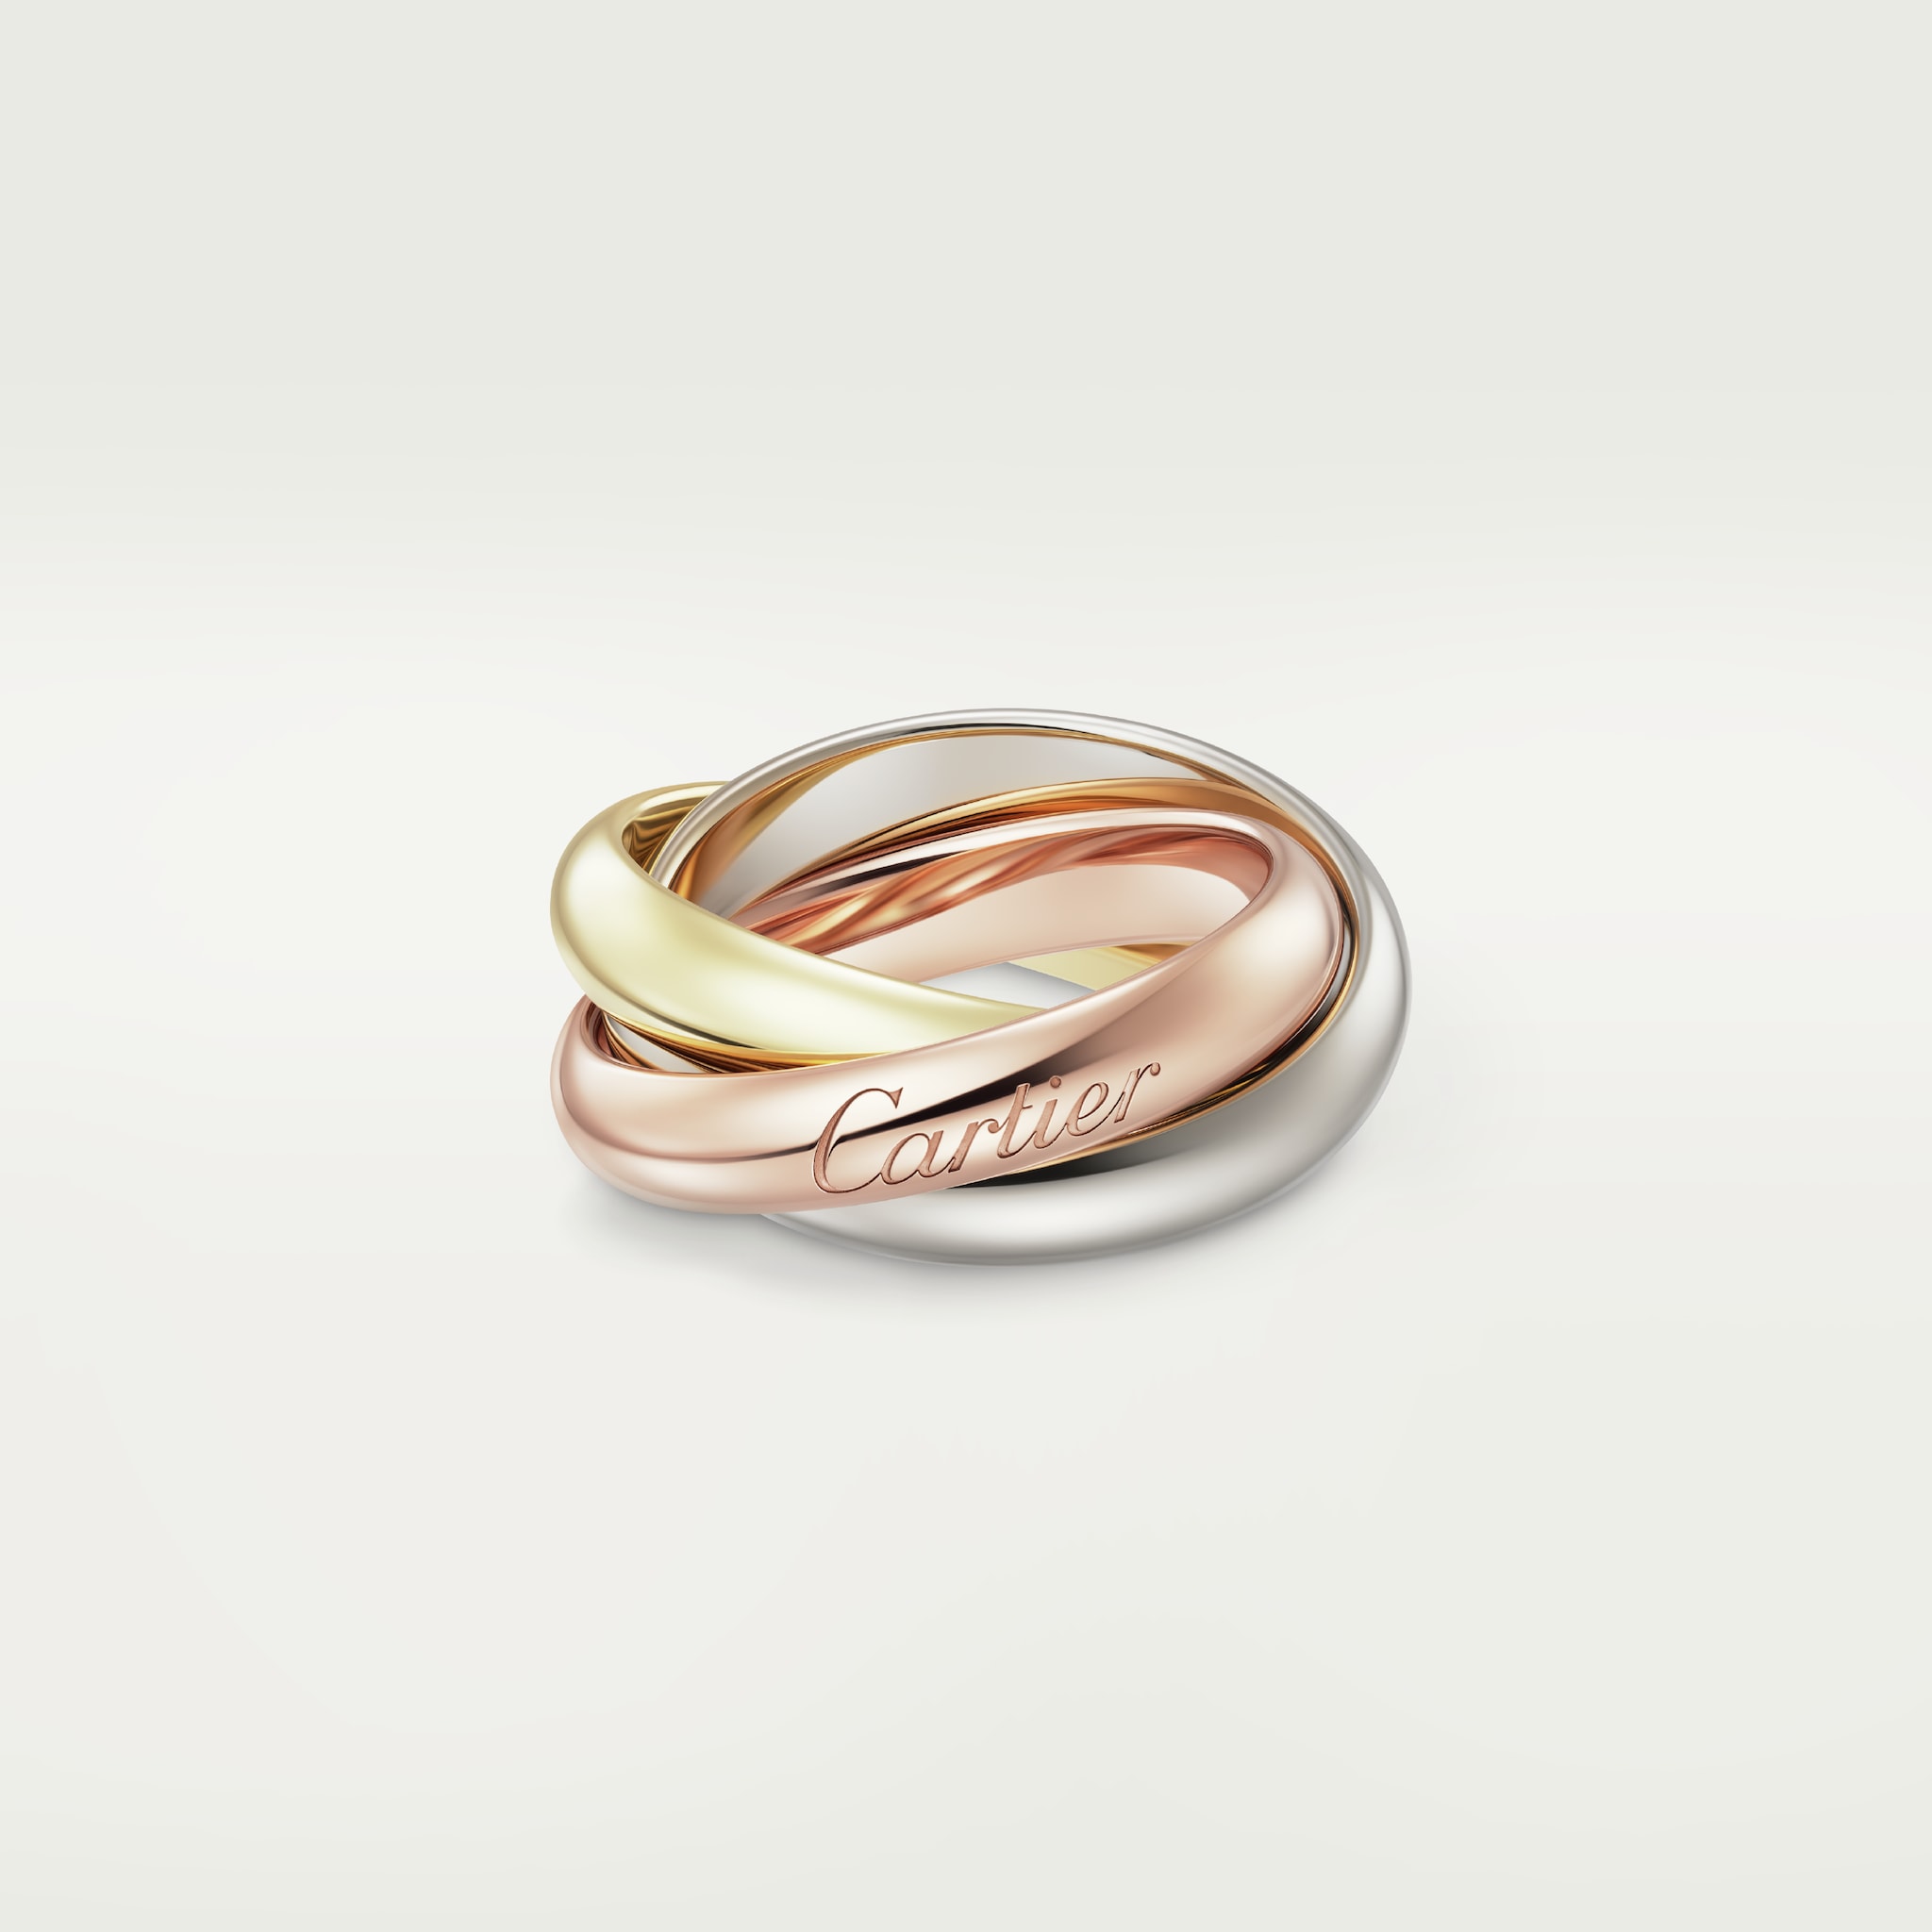 Trinity ring, large modelWhite gold, rose gold, yellow gold